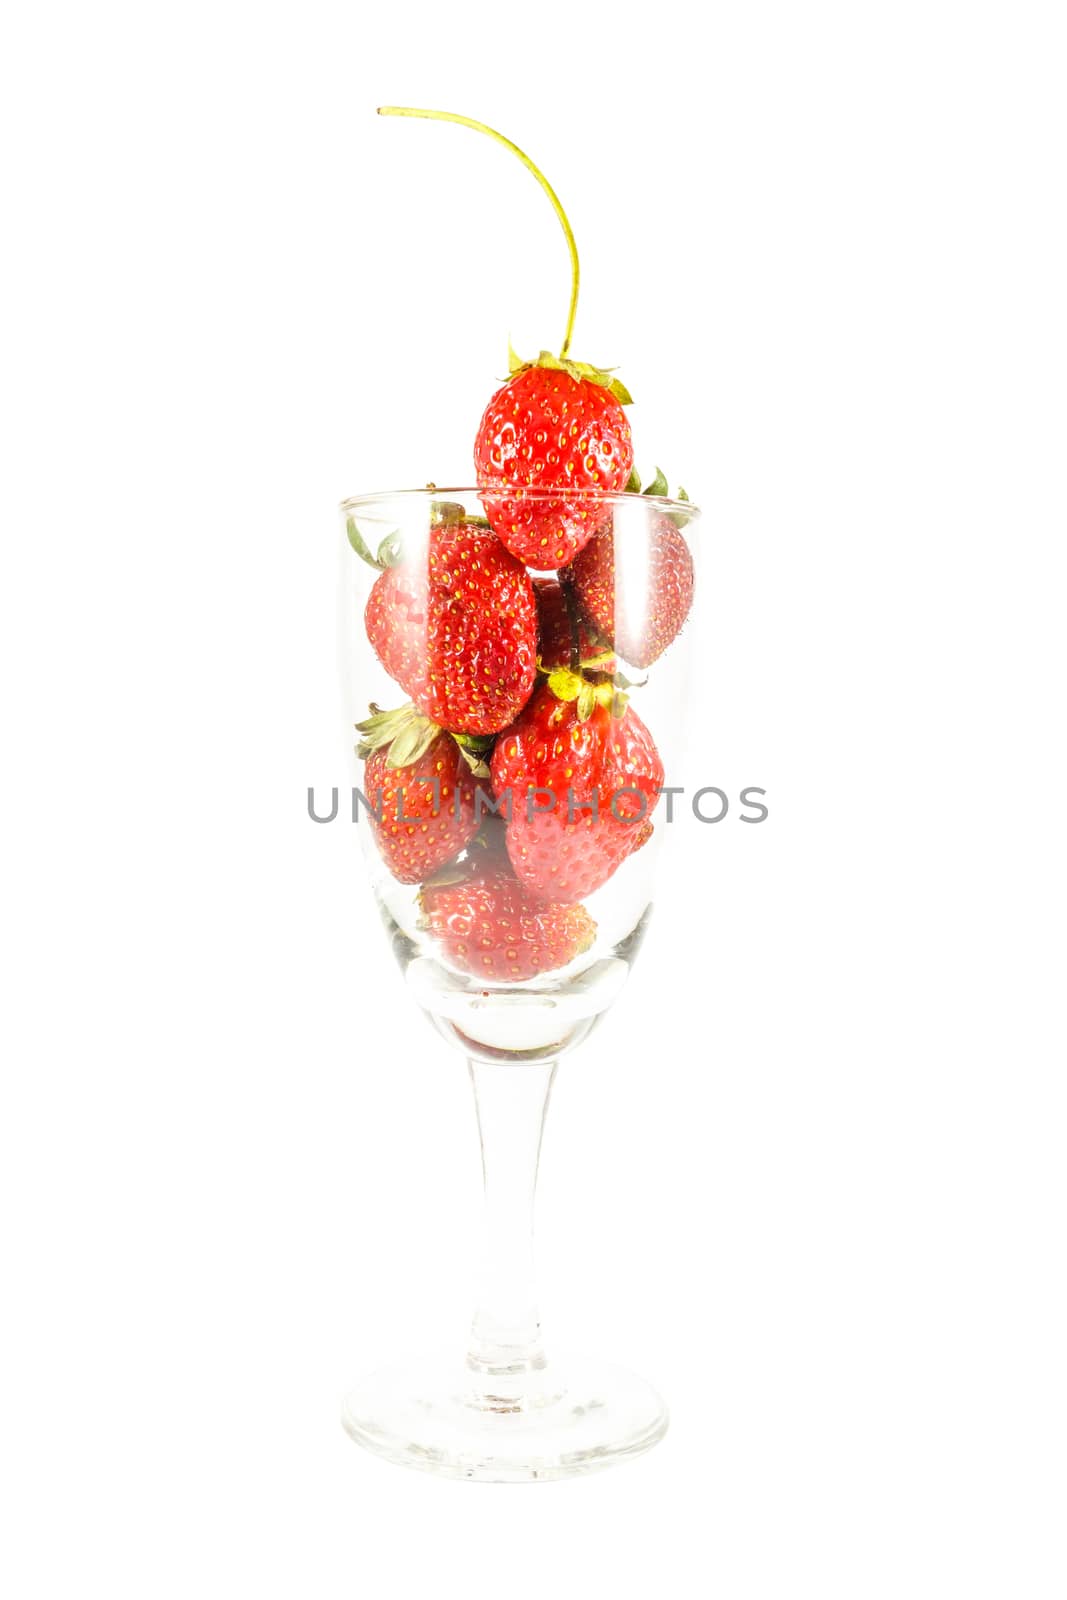 Strawberries in wine glass on white background (isolated)